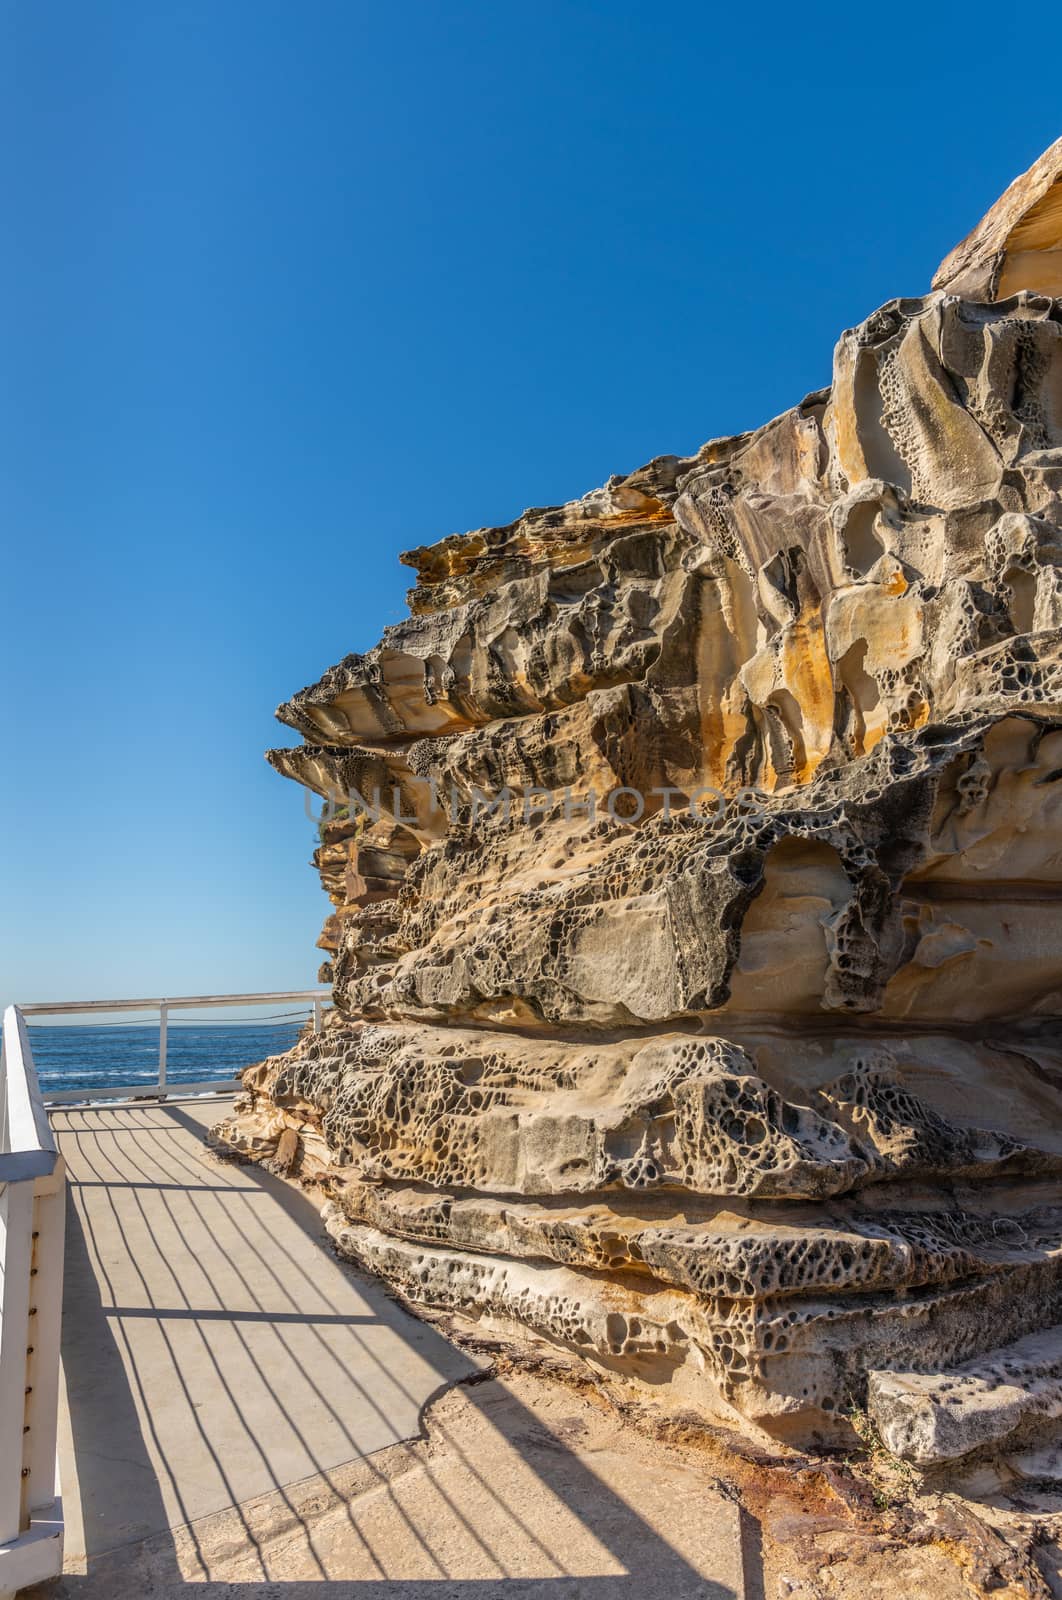 Sydney, Australia - February 11, 2019: Path ends at spectacular rock outcrop at Bronte Beach South cliffs, made by erosion.. Yellows and browns under blue sky. Sponge-like borders of shell like plates sticking out.